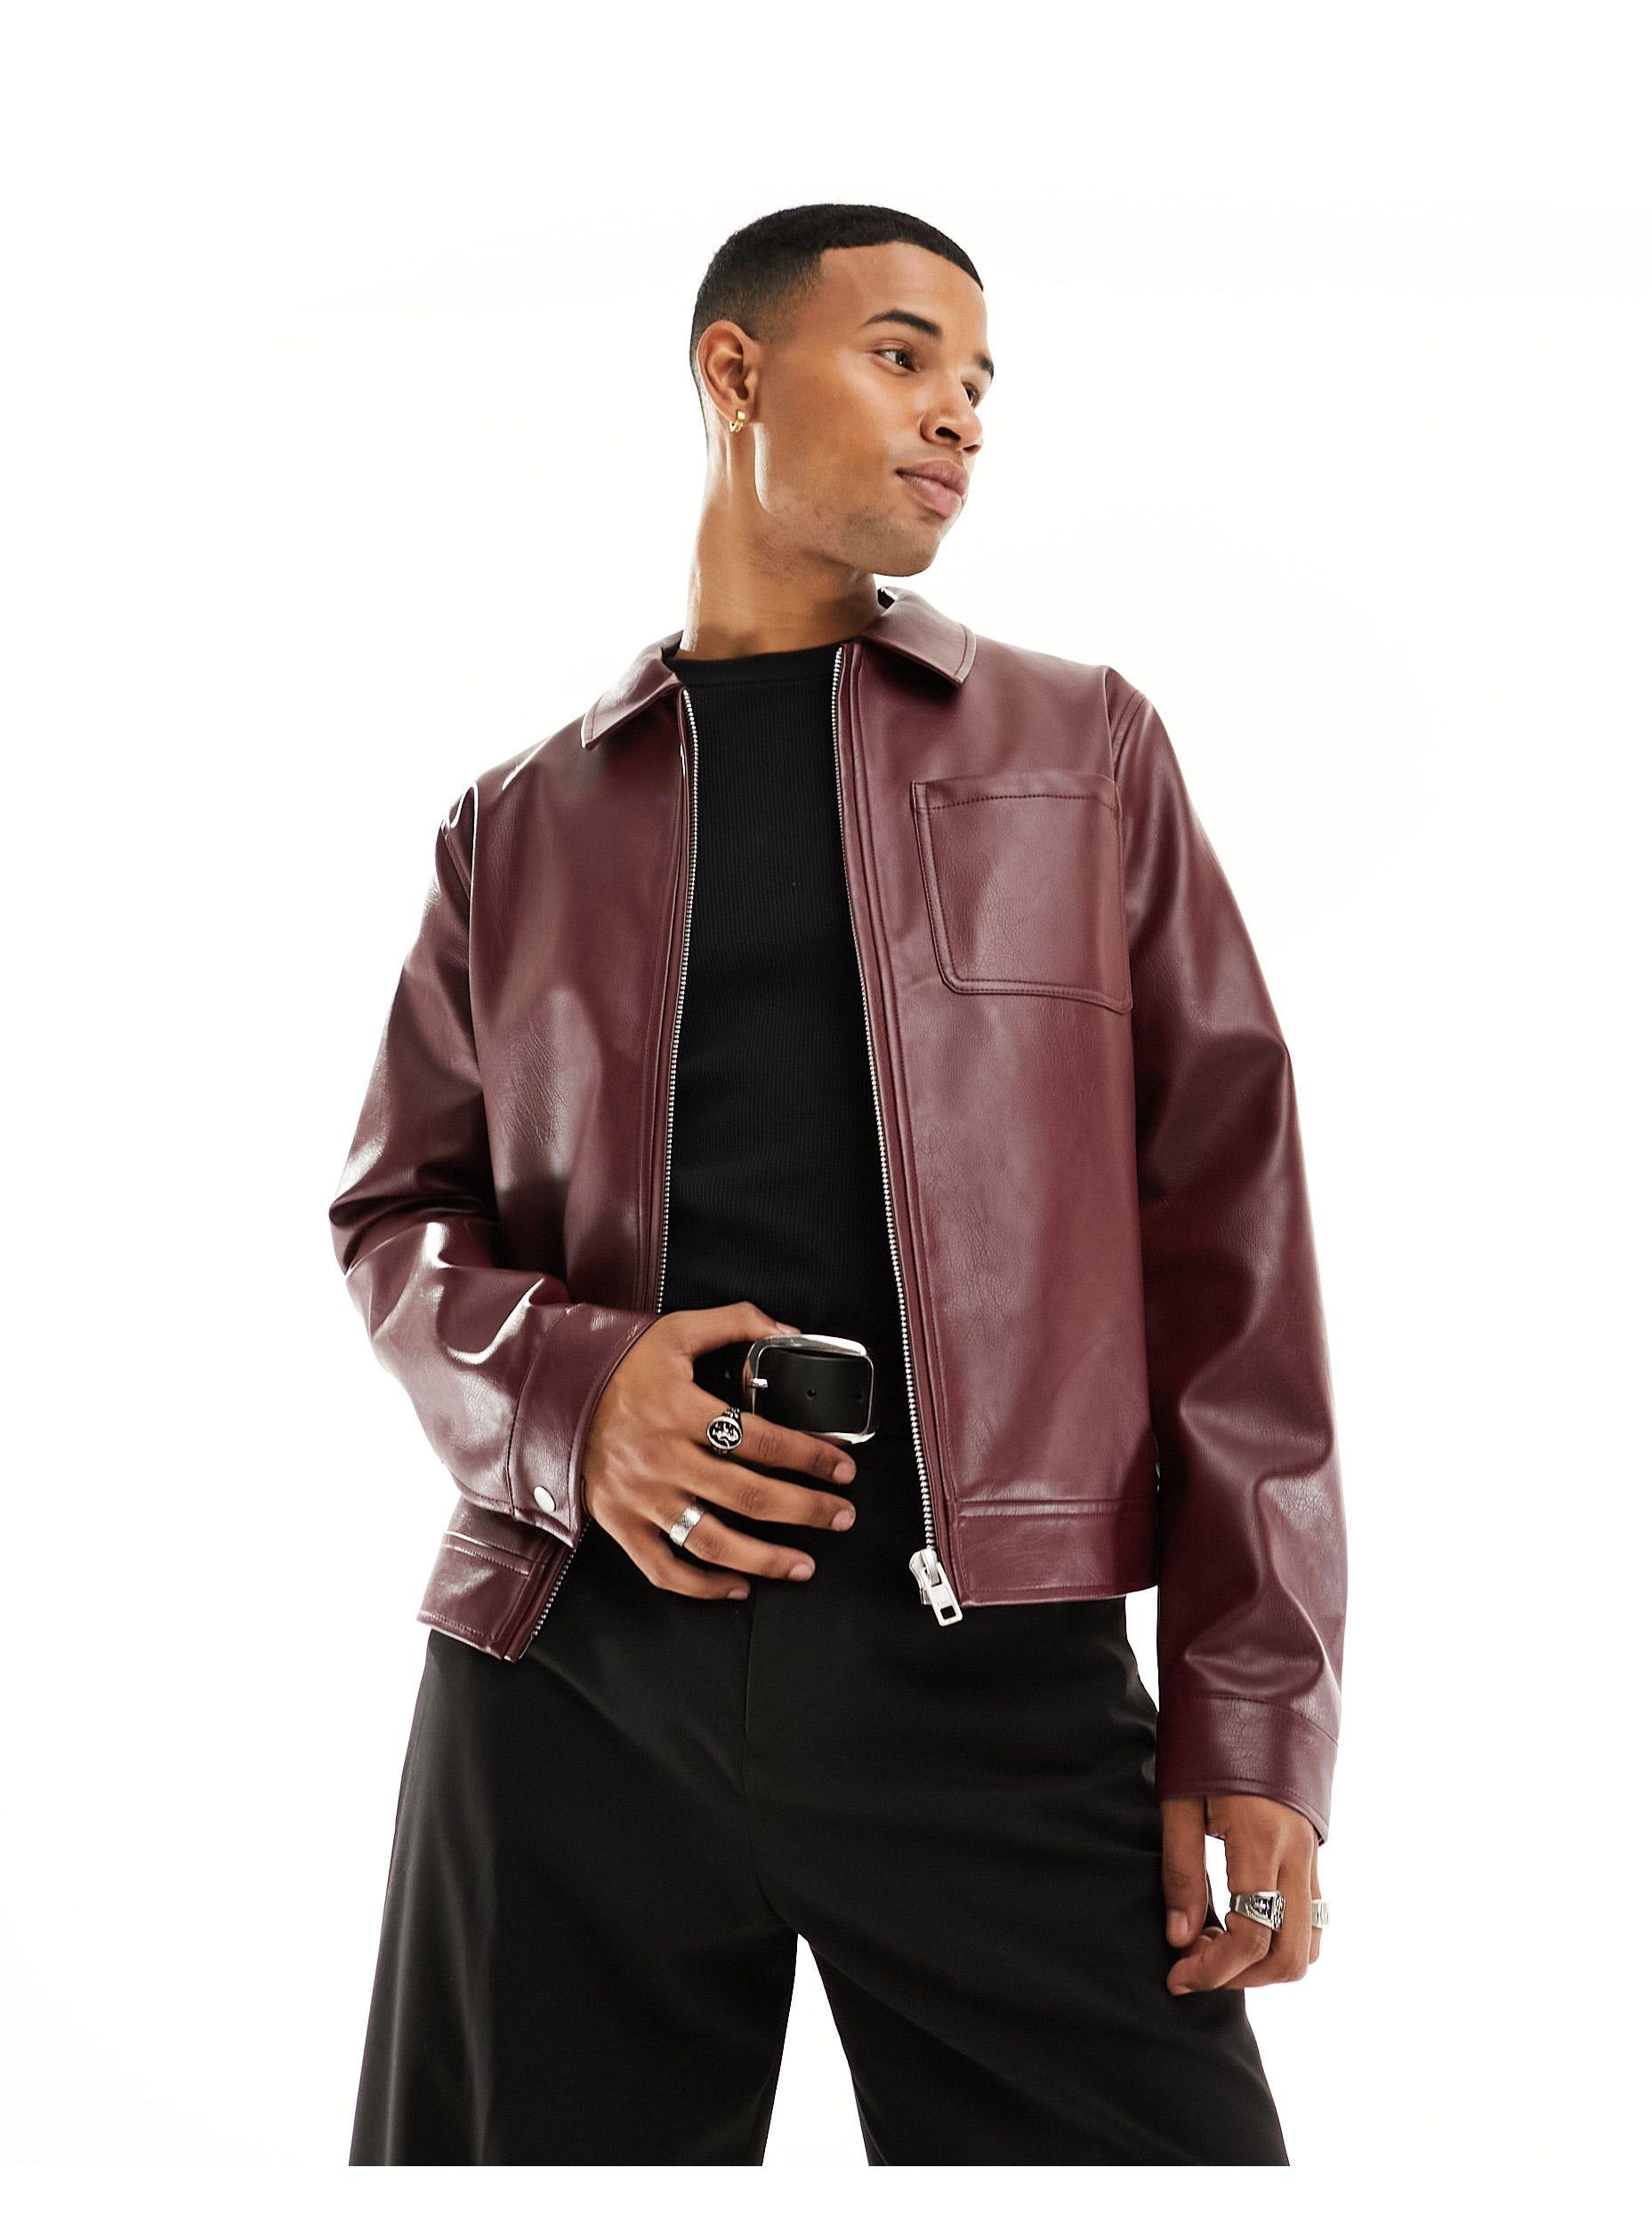 ASOS Real Leather Varsity Jacket in Green for Men